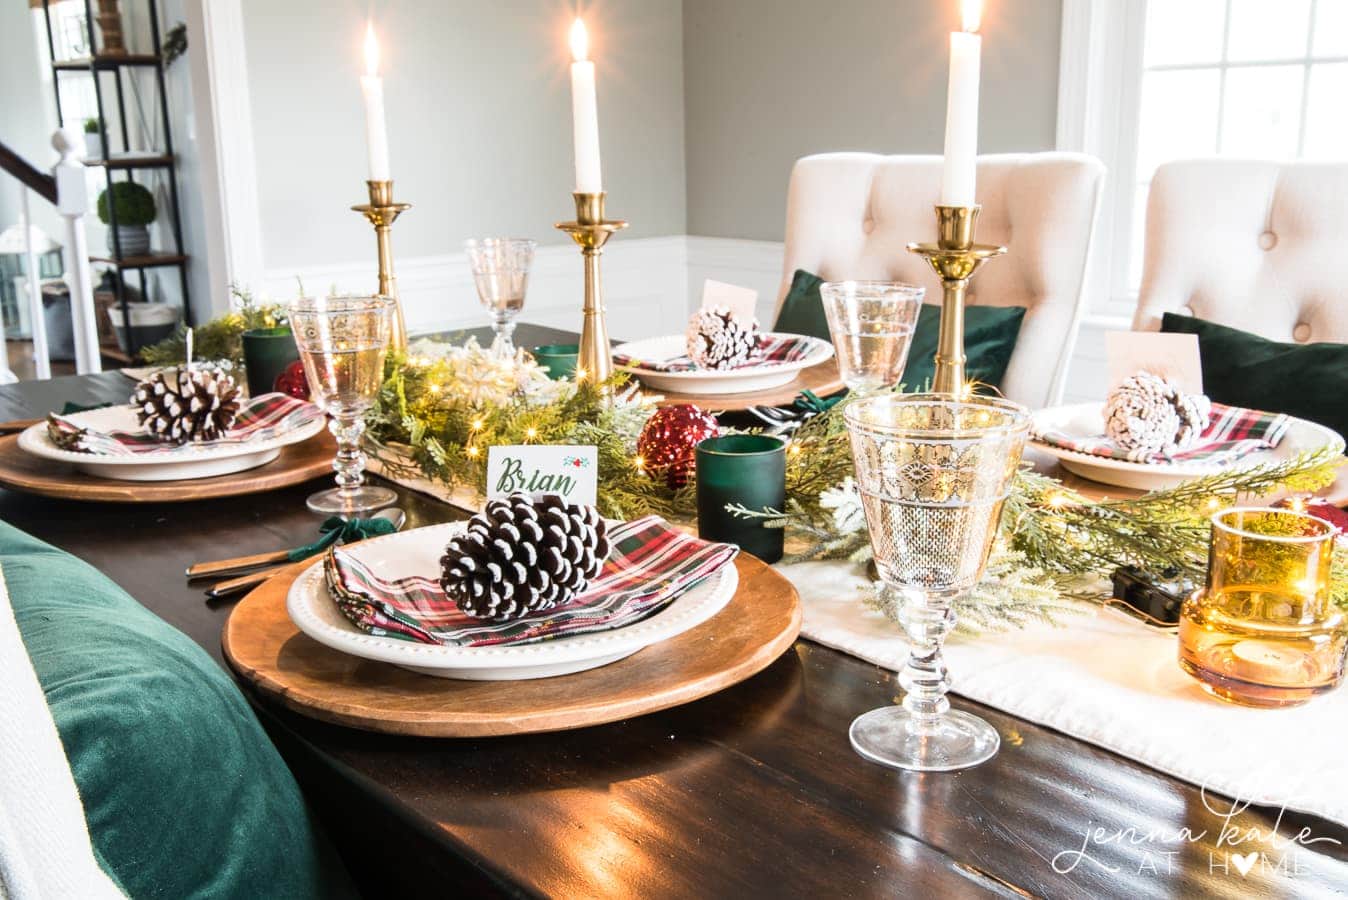 How to decorate your table for Christmas